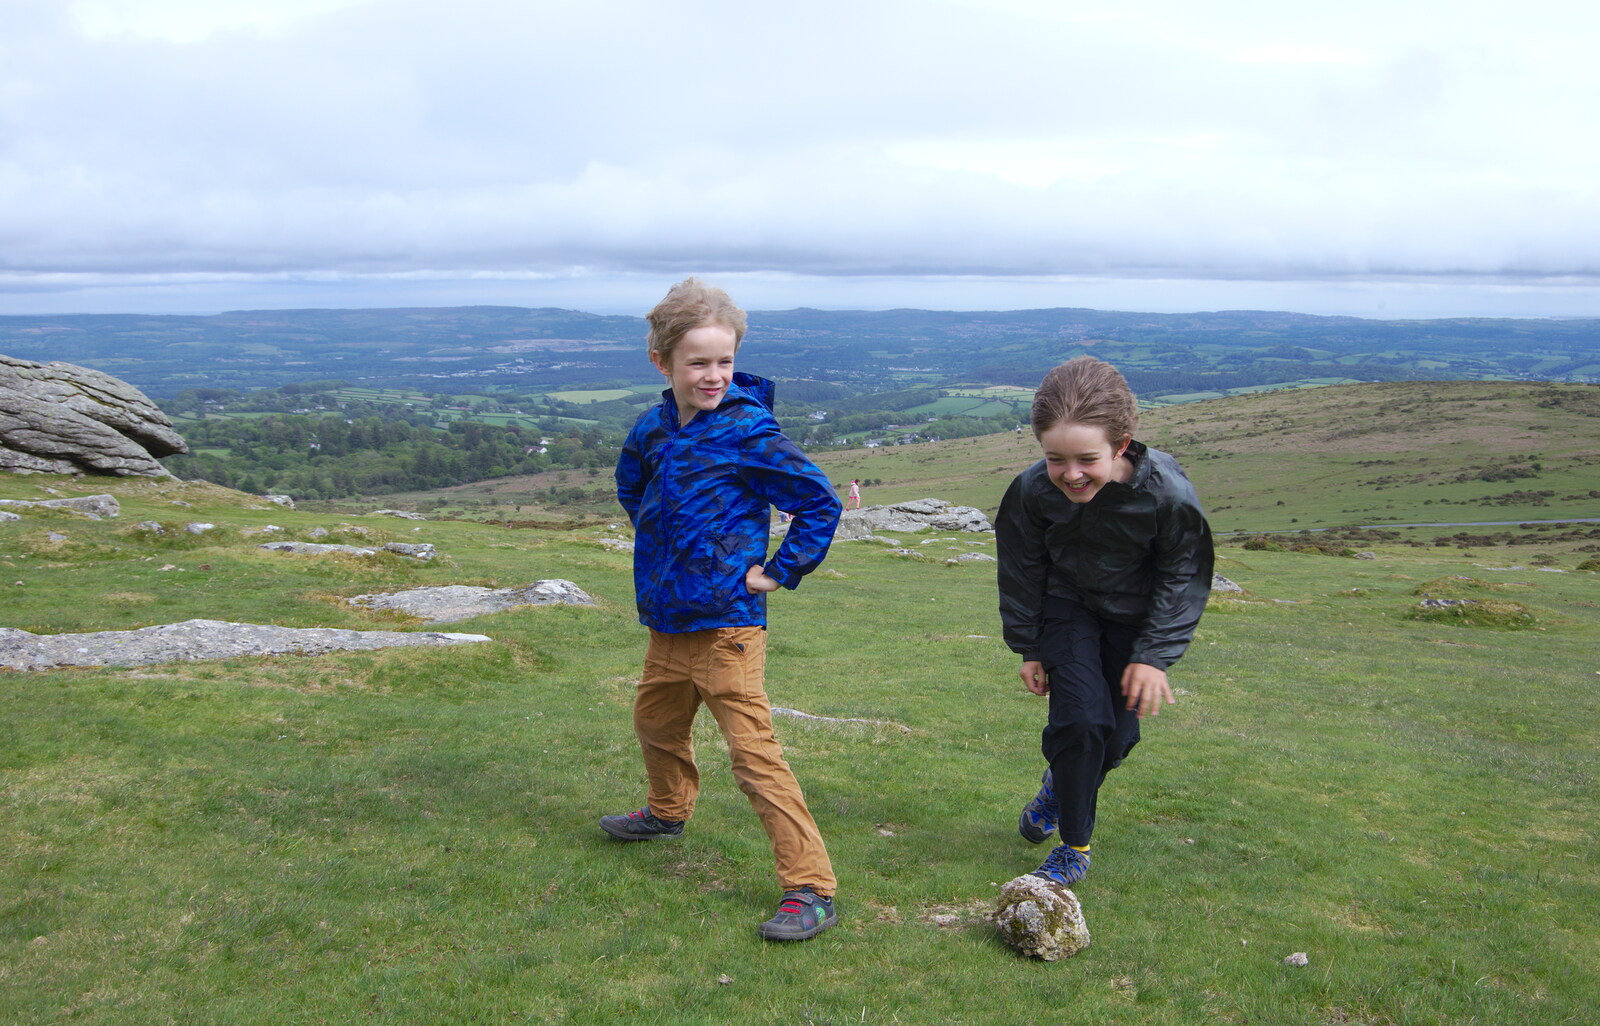 Harry and Fred enjoy messing around from The Tom Cobley and a Return to Haytor, Bovey Tracey, Devon - 27th May 2019